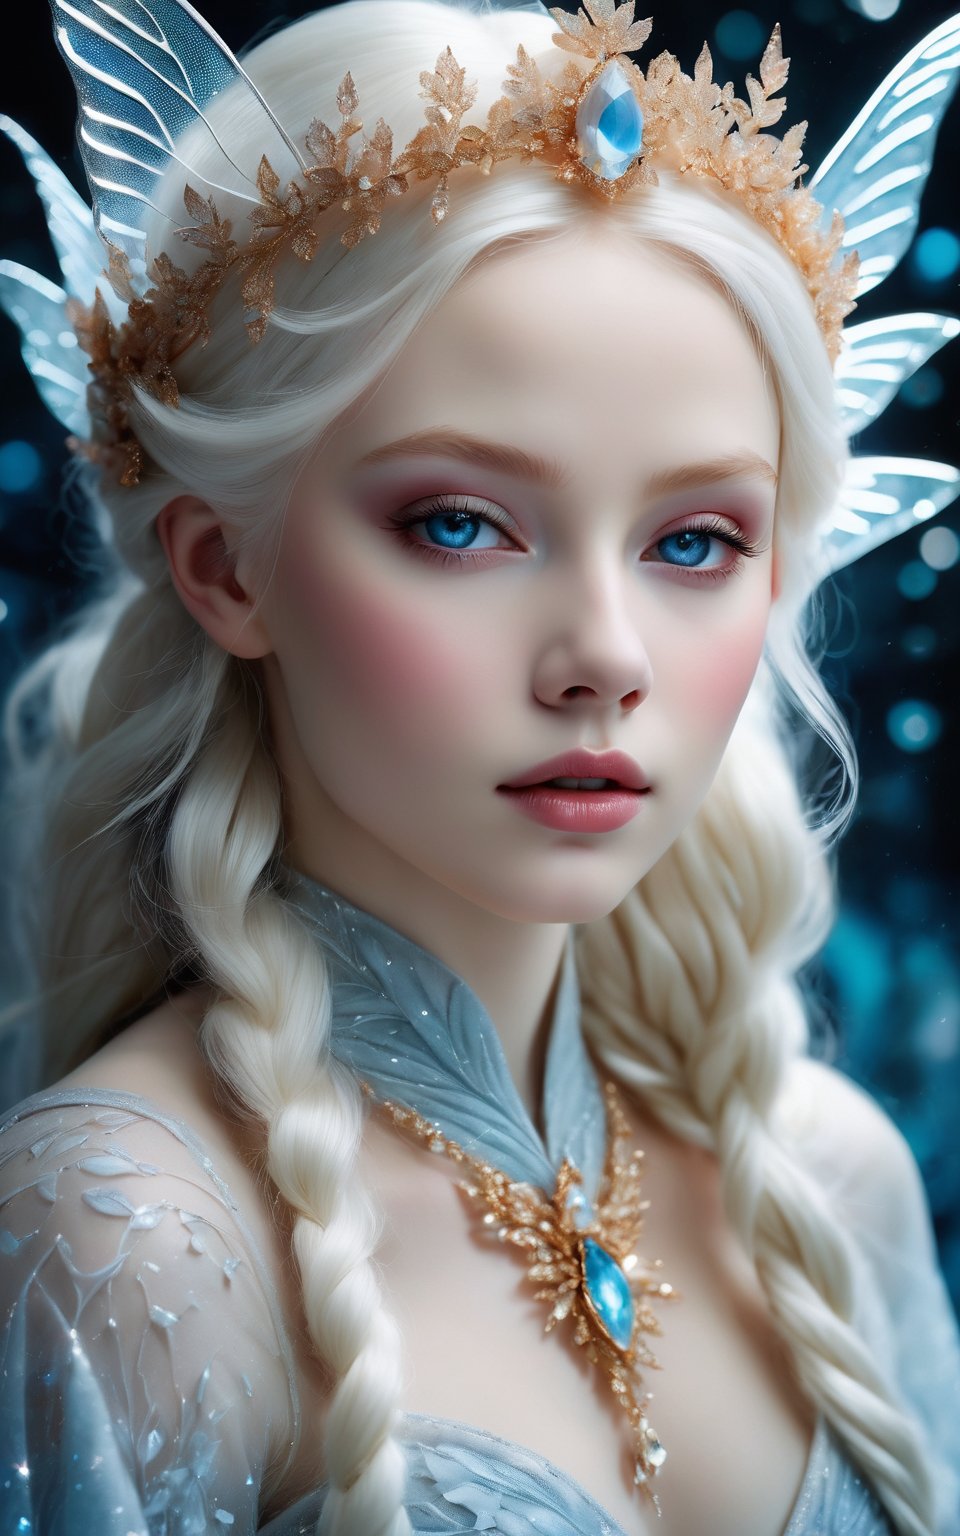 (best quality,8K,highres,masterpiece), ultra-detailed, (portrait of a beautiful ice fairy with albino porcelain skin), a enchanting ice fairy with ethereal features. Her porcelain skin is pristine and pale, with a delicate beauty that captivates the viewer. Ice blue eyes gleam with an otherworldly light, while her hair cascades in intricate ice-like strands, shimmering with a rasta-inspired pattern. Adorned with pearls and crystalline ice accents, she exudes an aura of timeless elegance and mystique. The scene is reminiscent of a fairy tale, with a monochrome color palette adding to the dreamlike quality of the artwork. Created using a mixed-media collage technique, the portrait is a masterpiece of texture and depth, with every detail meticulously crafted to perfection. Feel free to add your own creative touches to enhance the enchantment and beauty of this captivating ice fairy.